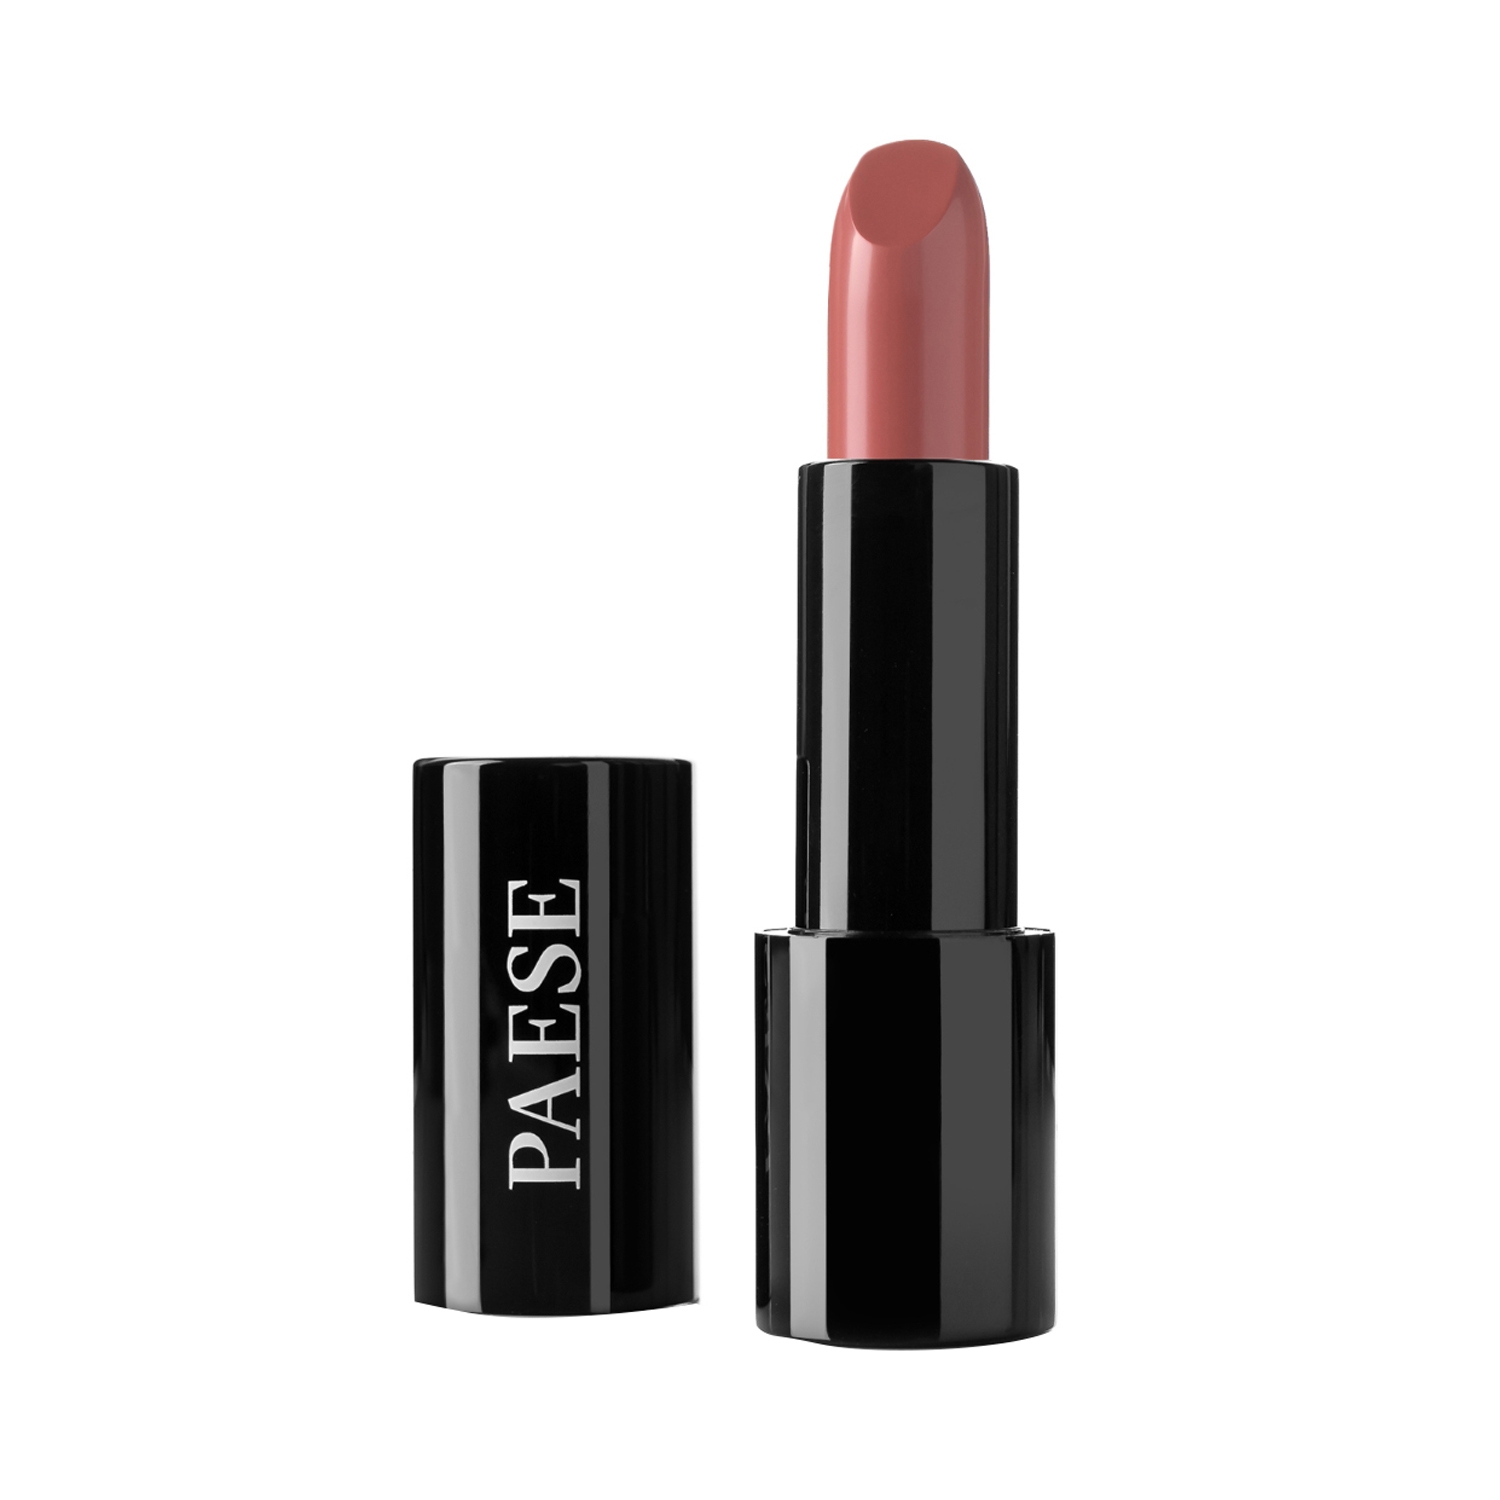 Paese Cosmetics Lipstick with Argan Oil - 76 Brown (4.3g)